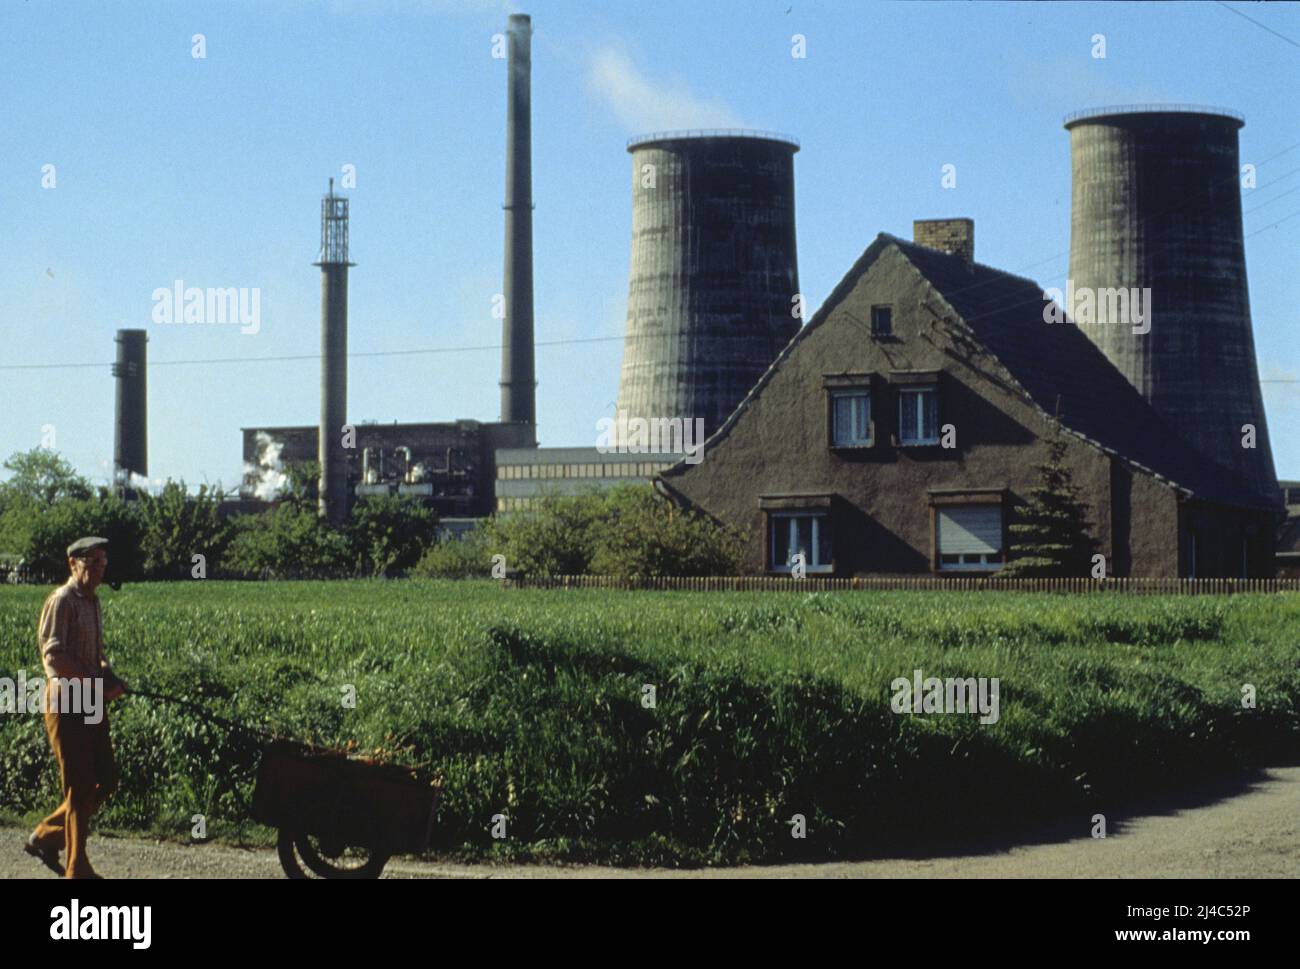 east germany pollution a leipzig Mai 1990 thermal power plant Stock Photo